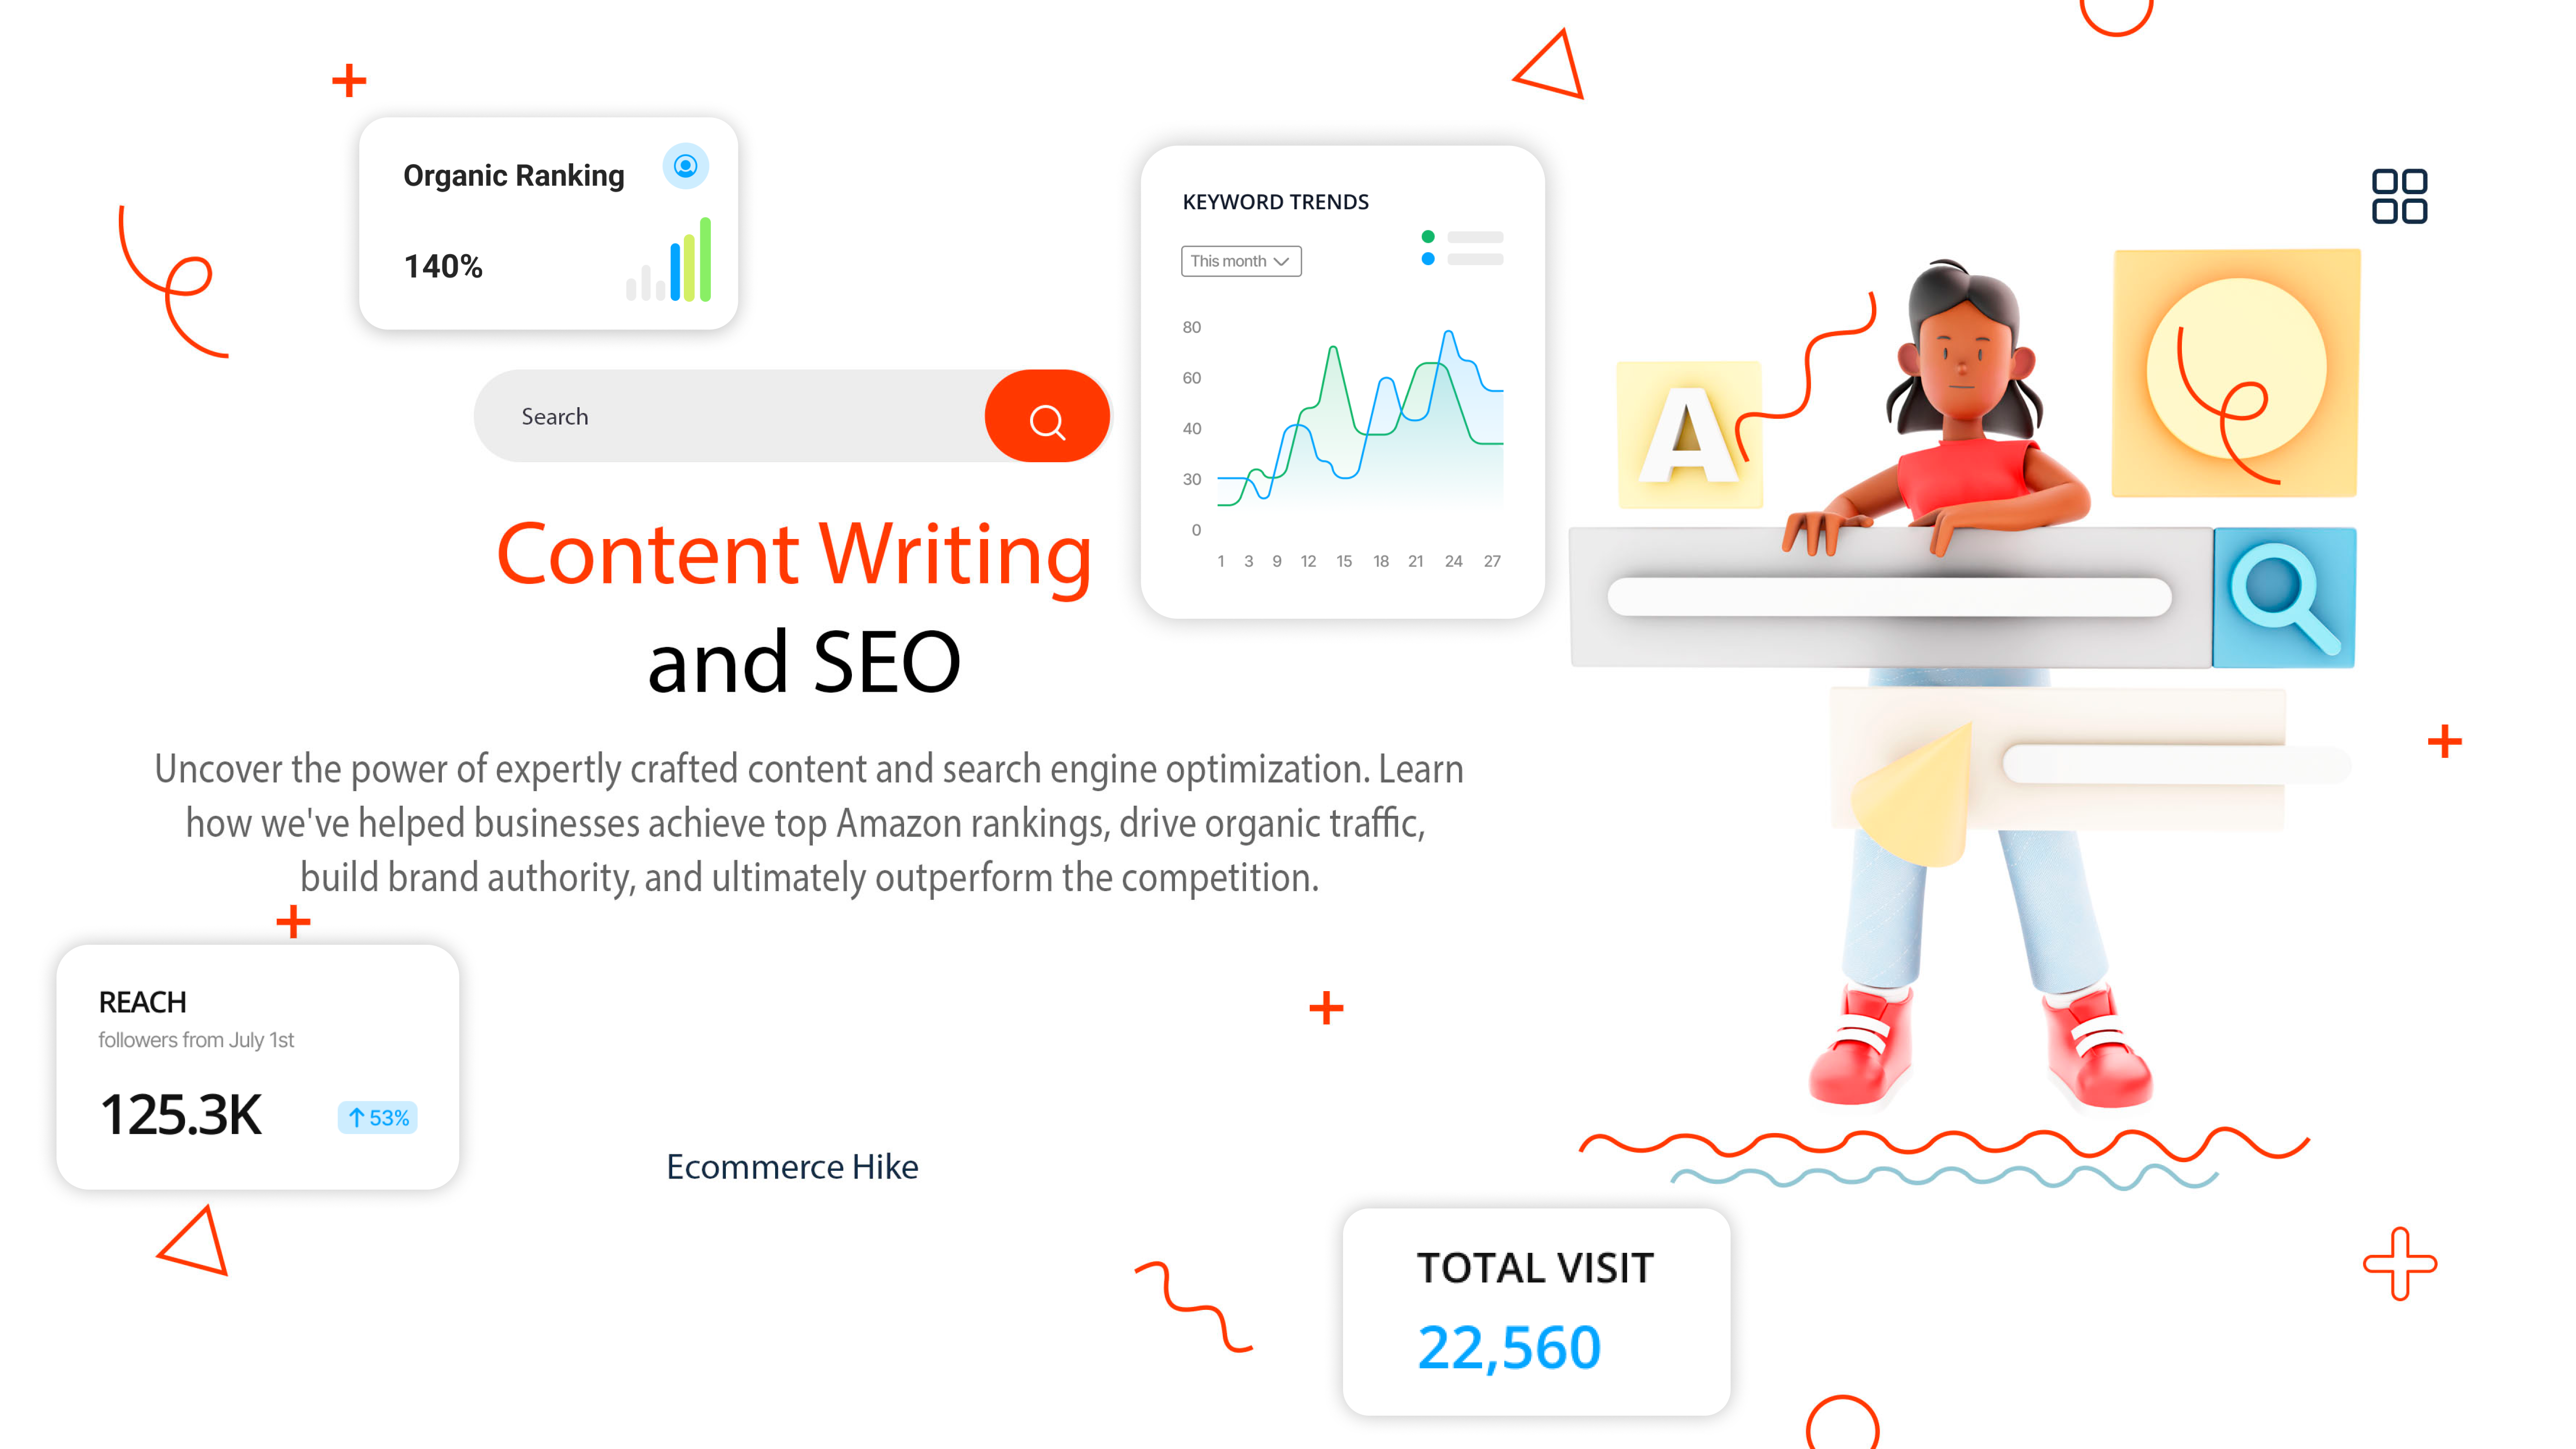 Content Writing and SEO optimization